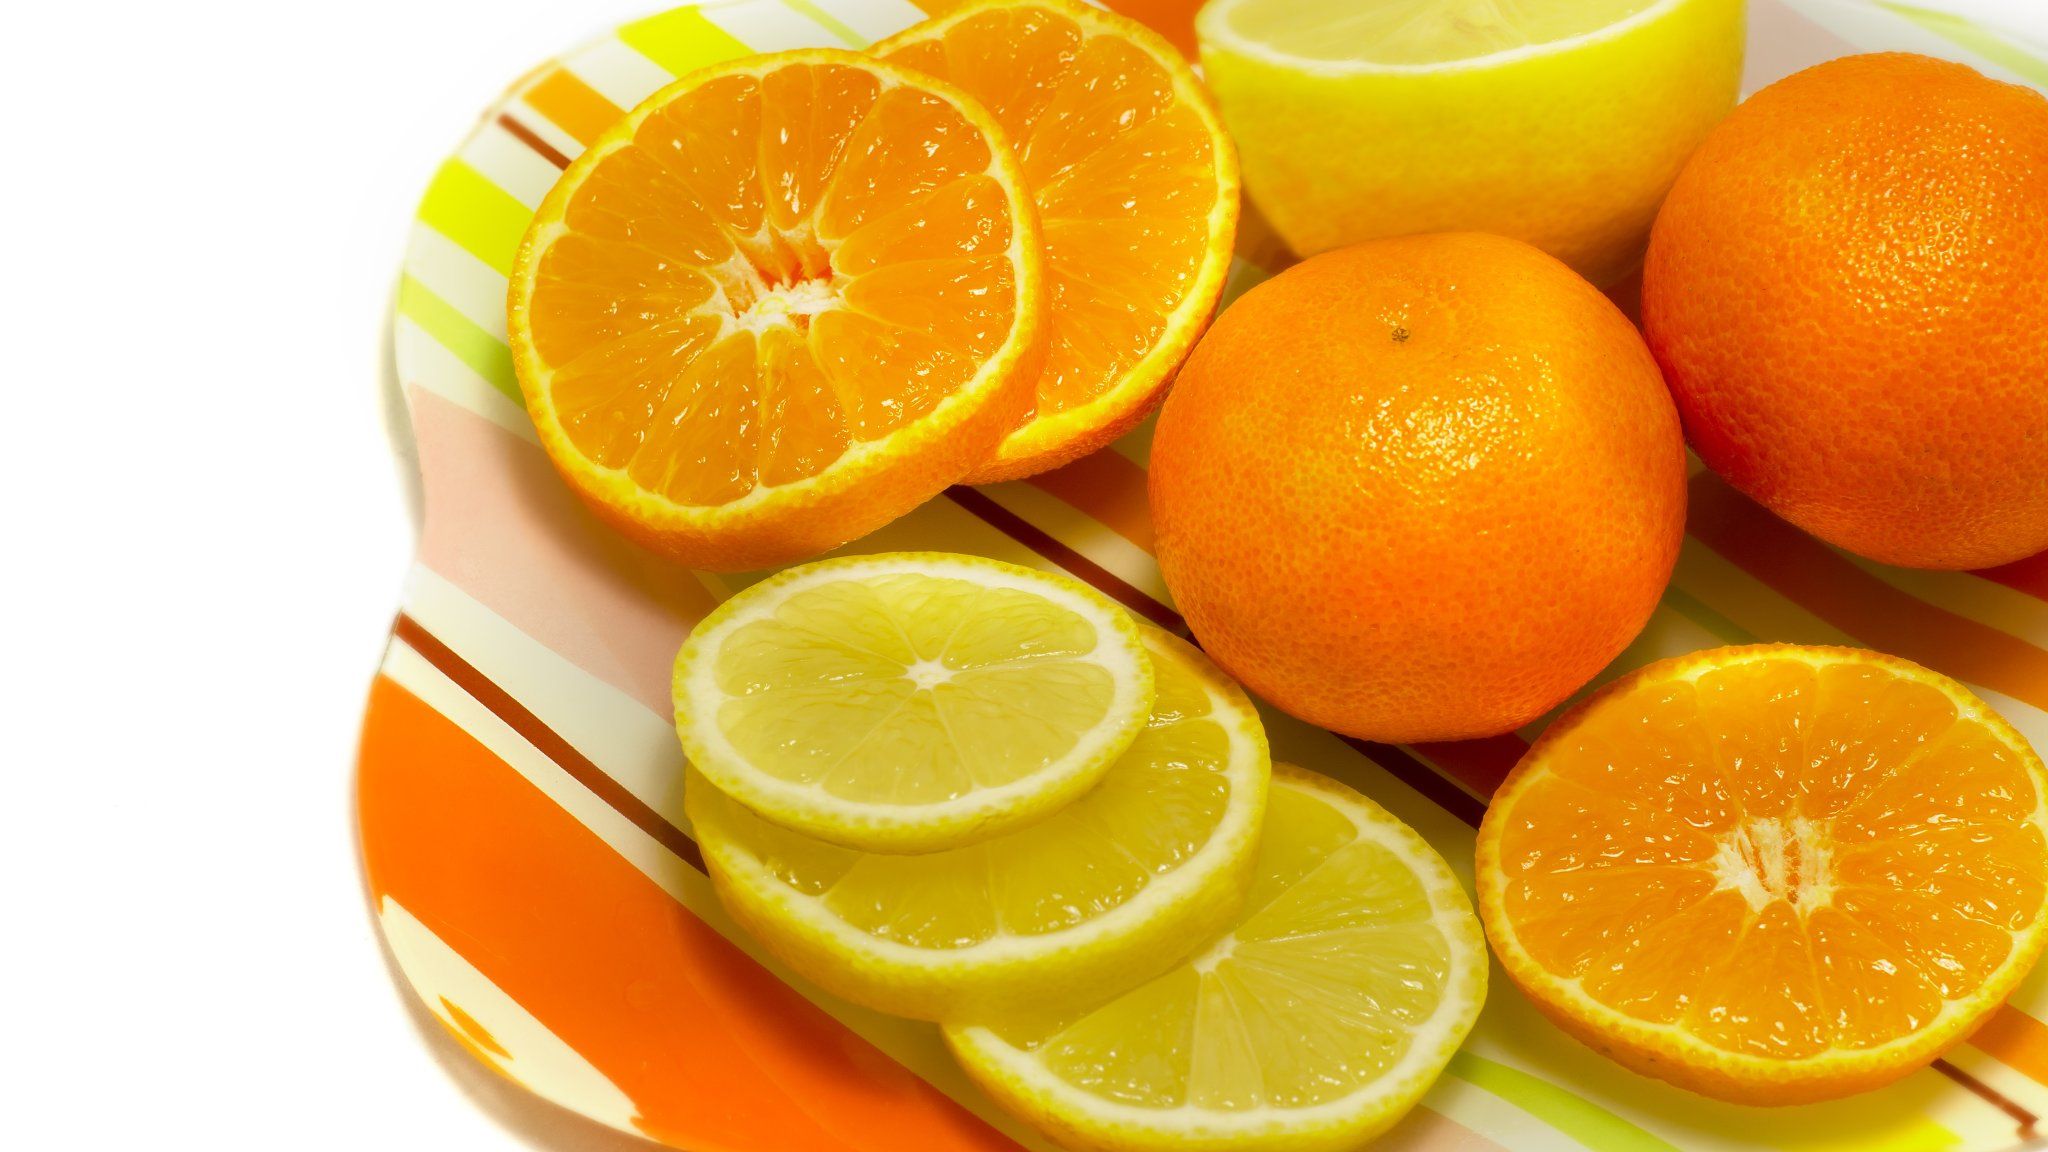 A plate of oranges and lemons